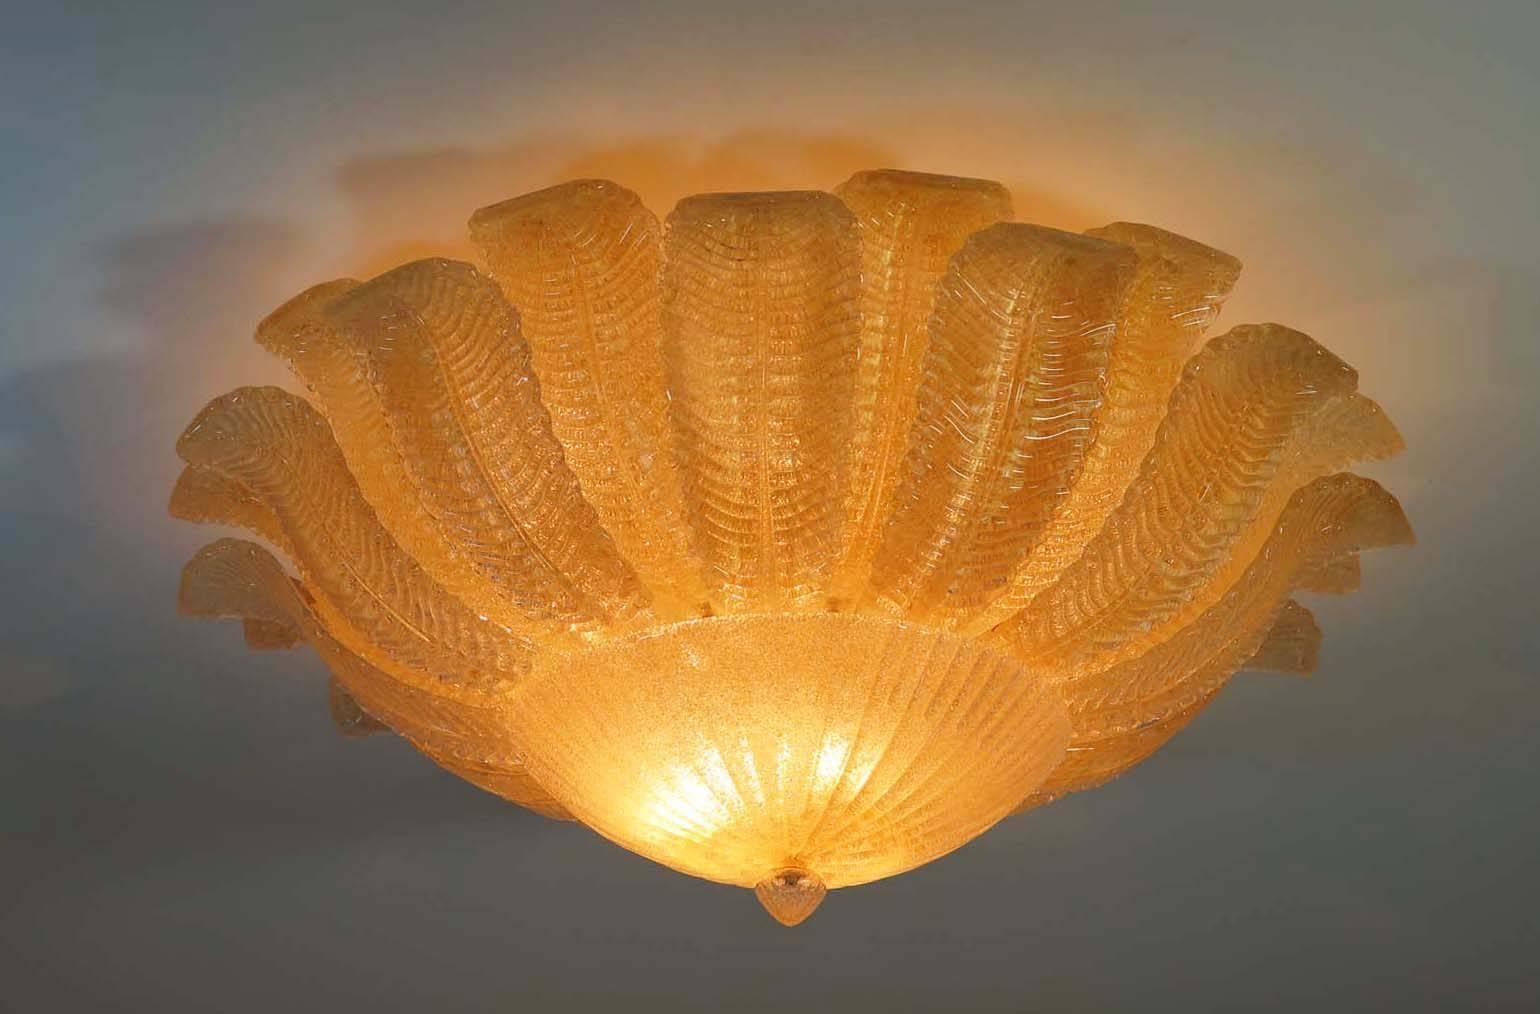 Fantastic and fabulous of vintage Barovier and Toso Murano Italy art glass ceiling light. The rare lamp is made of 24 mouth-blown hand-formed leaf-form golden powder glass panels plus a huge glass as a bottom. This beauty has the look of a precious